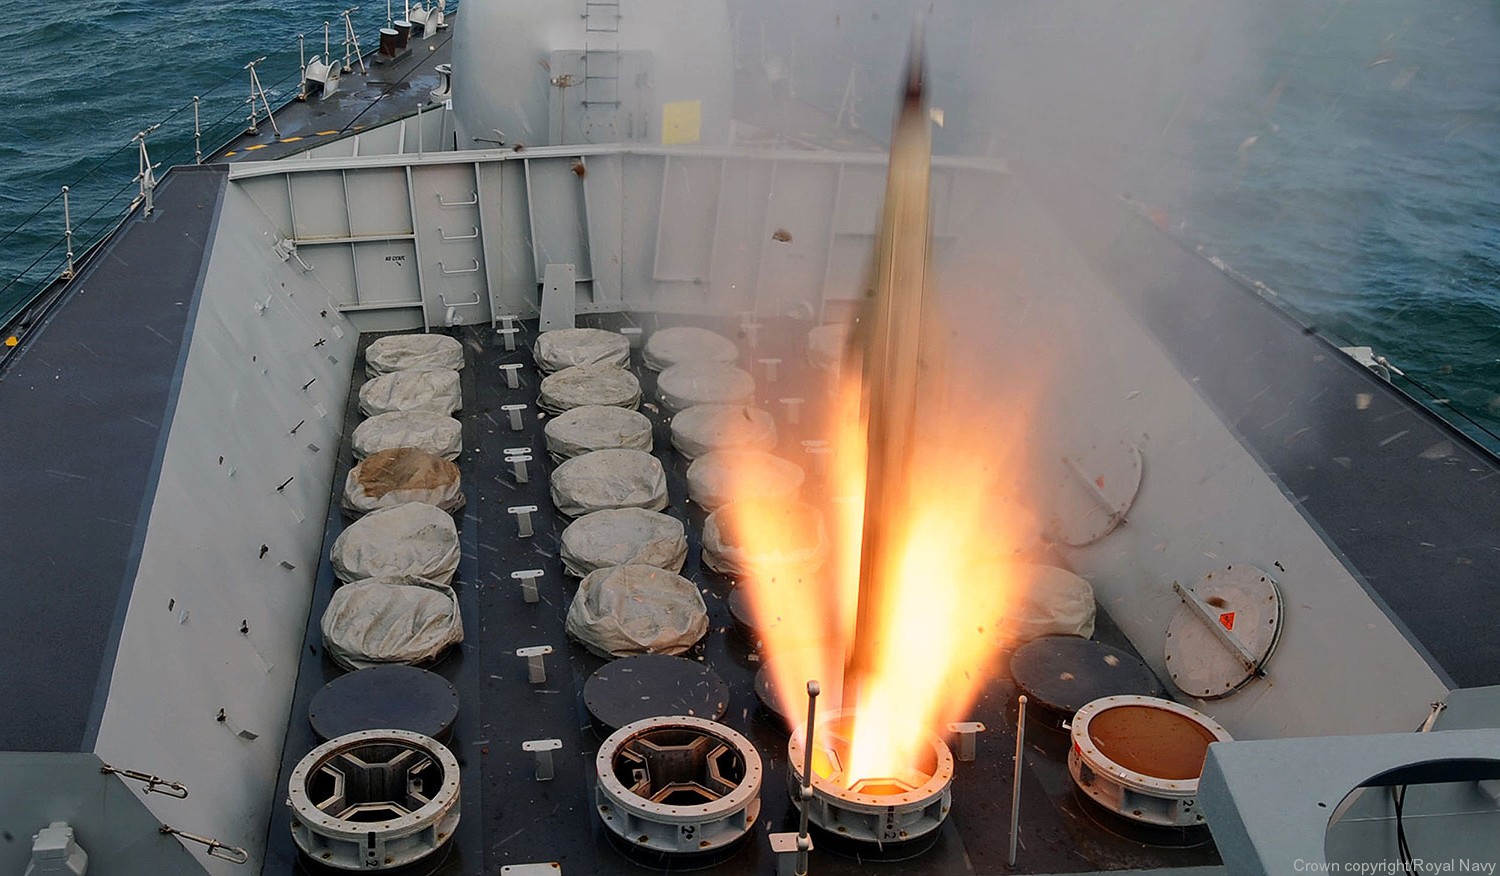 sea wolf sam missile gws-26 guided weapon system vertical launch type 23 duke class frigate royal navy 09